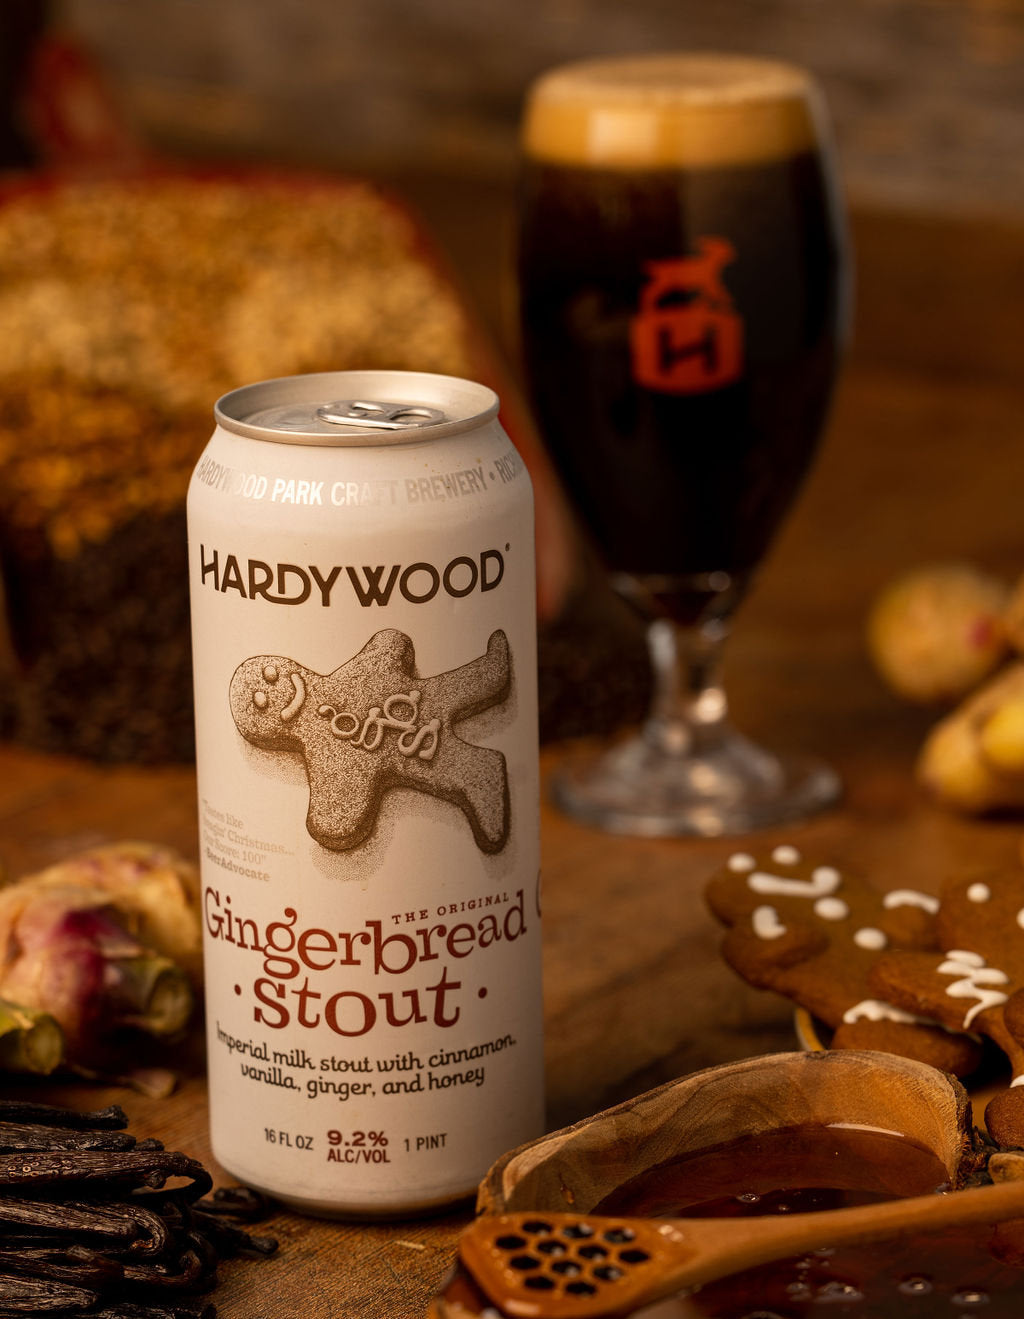 Gingerbread Stout